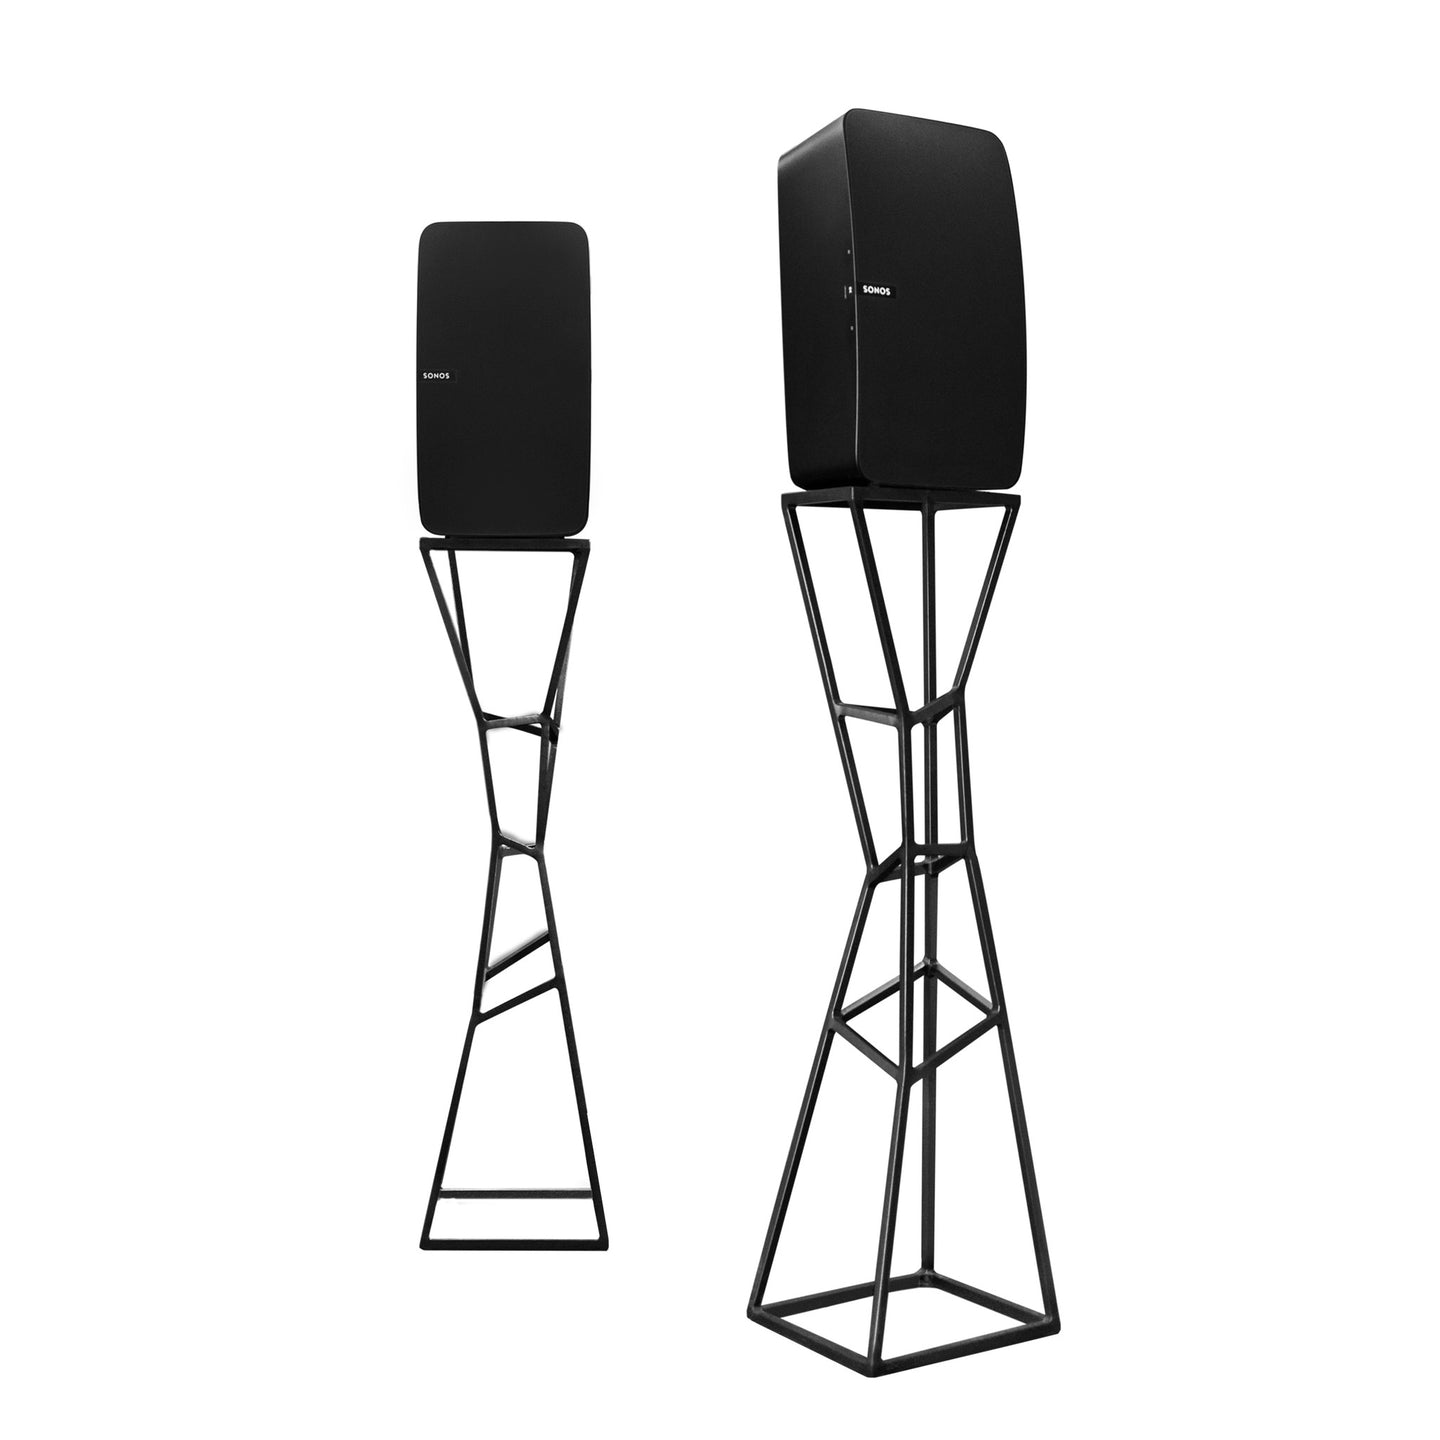 Speaker Stands For Sonos Play 5 Pose